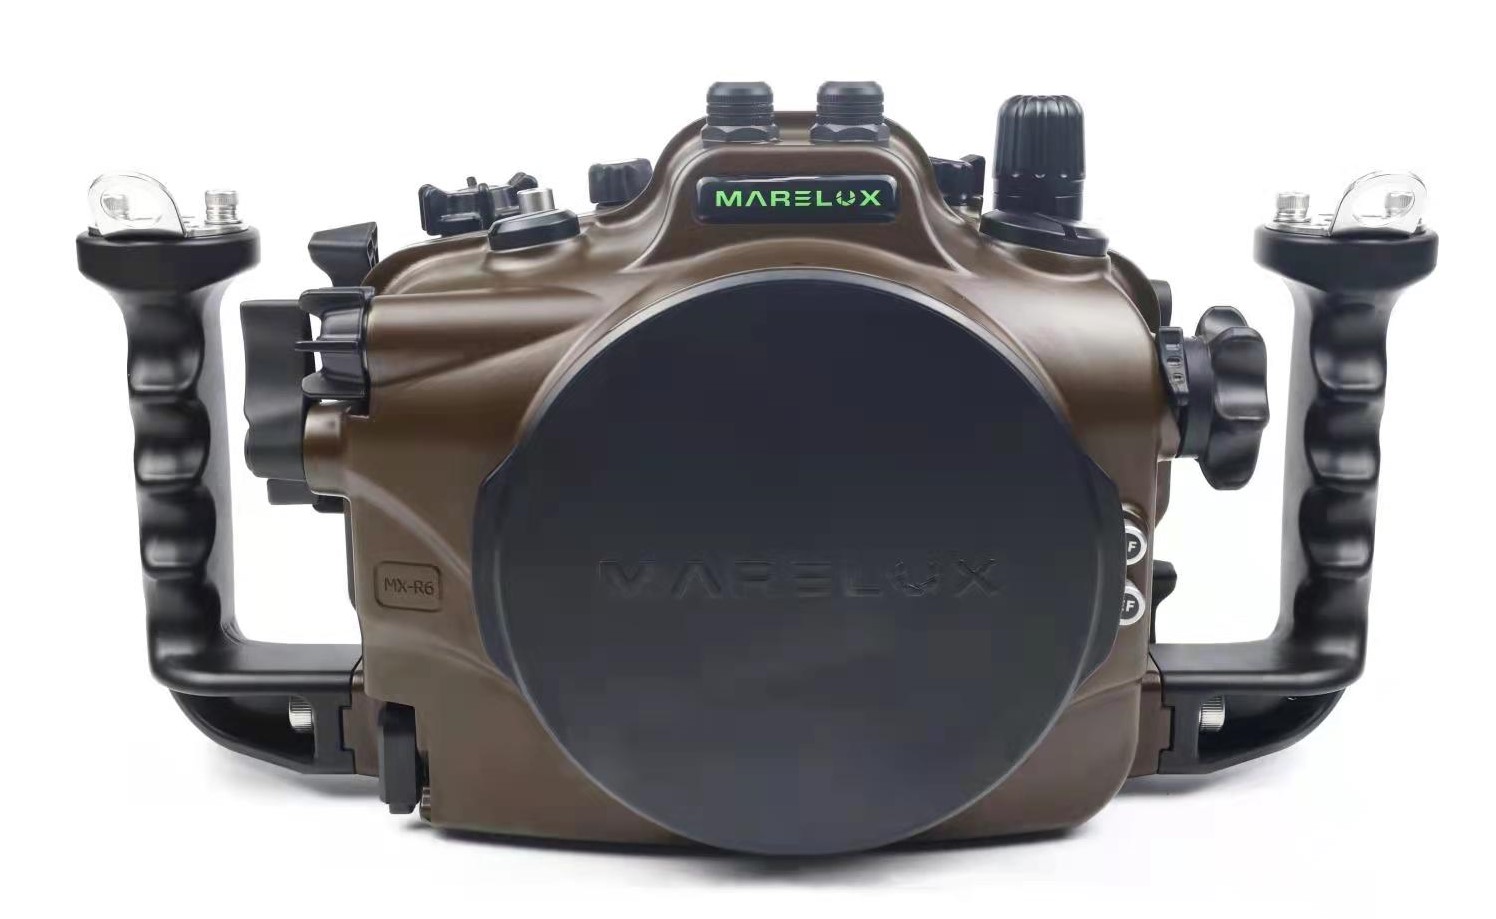 Canon EOS R6 underwater housing by Marelux